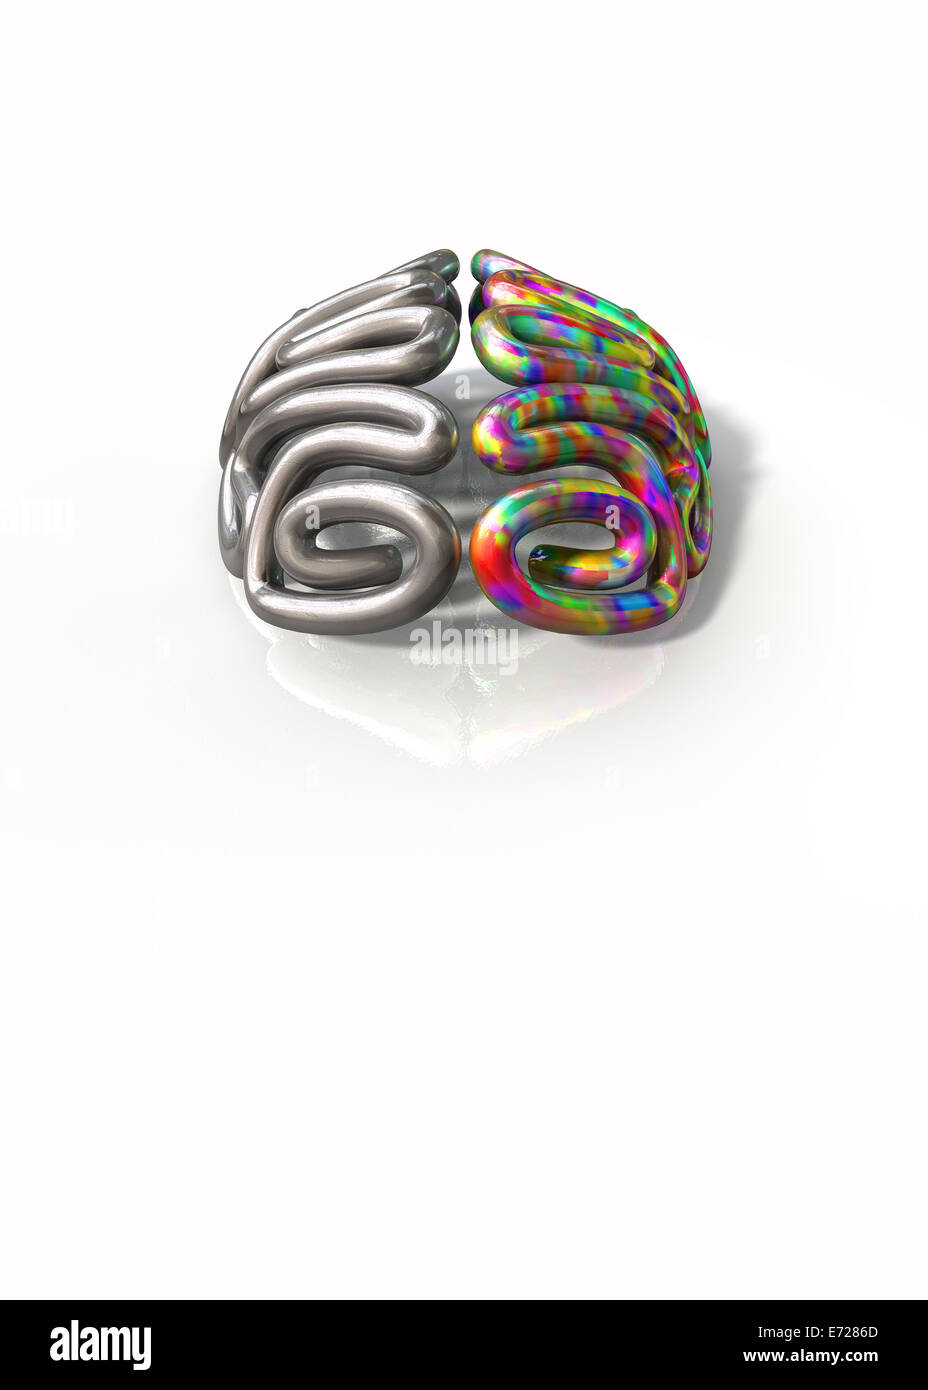 A stylized metal casting depicting a brain with the left side depicting an conservative and logical mind, and the right side dep Stock Photo